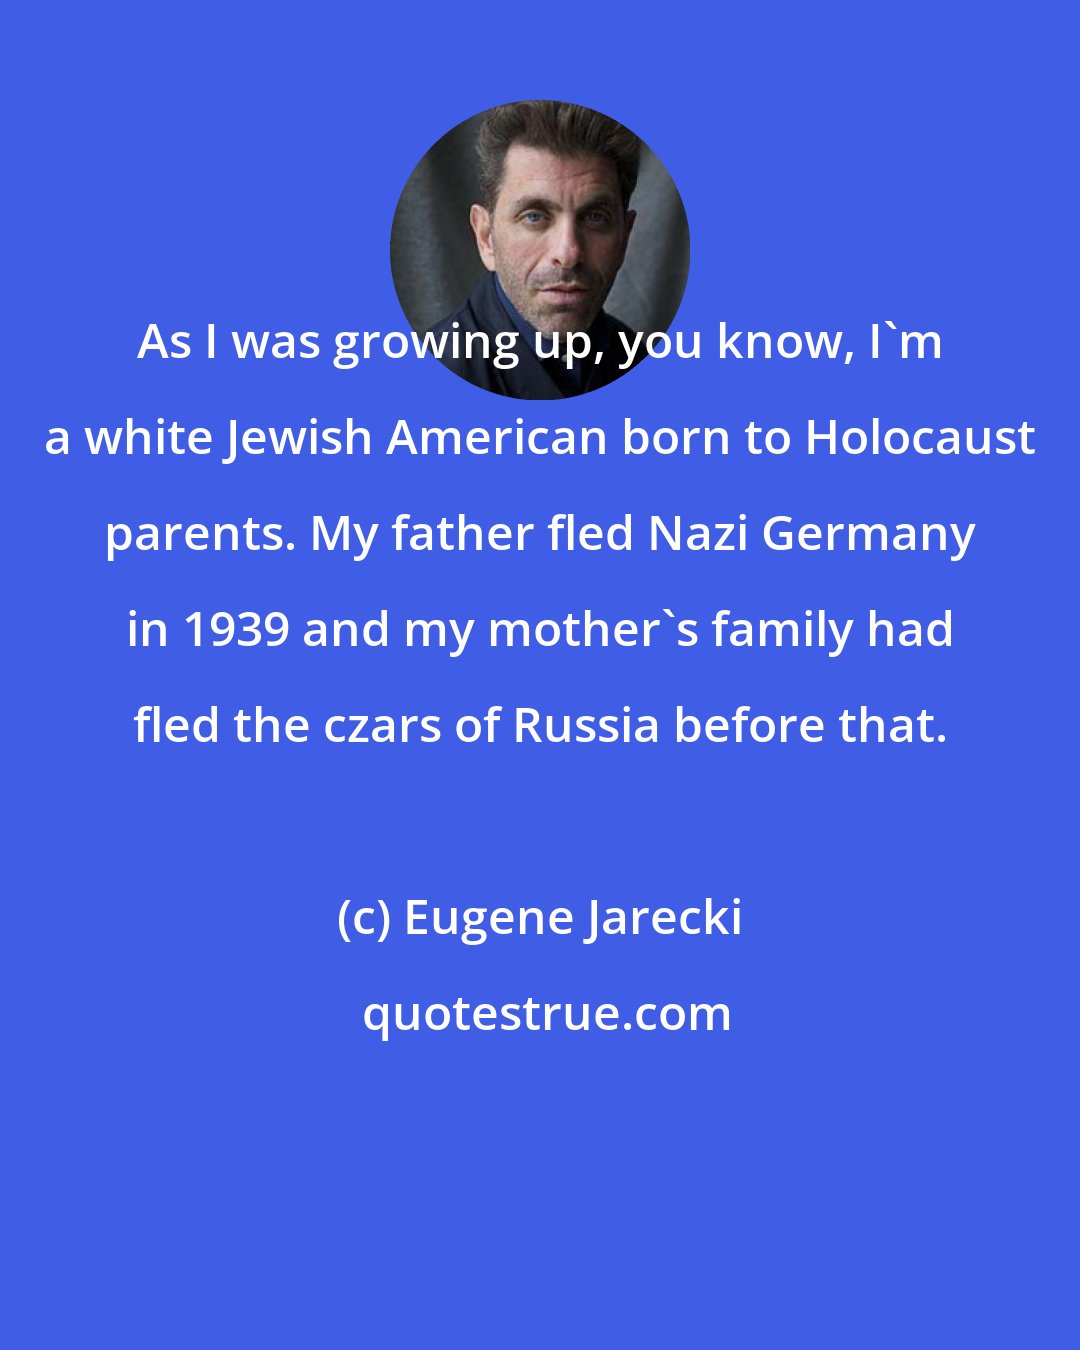 Eugene Jarecki: As I was growing up, you know, I'm a white Jewish American born to Holocaust parents. My father fled Nazi Germany in 1939 and my mother's family had fled the czars of Russia before that.